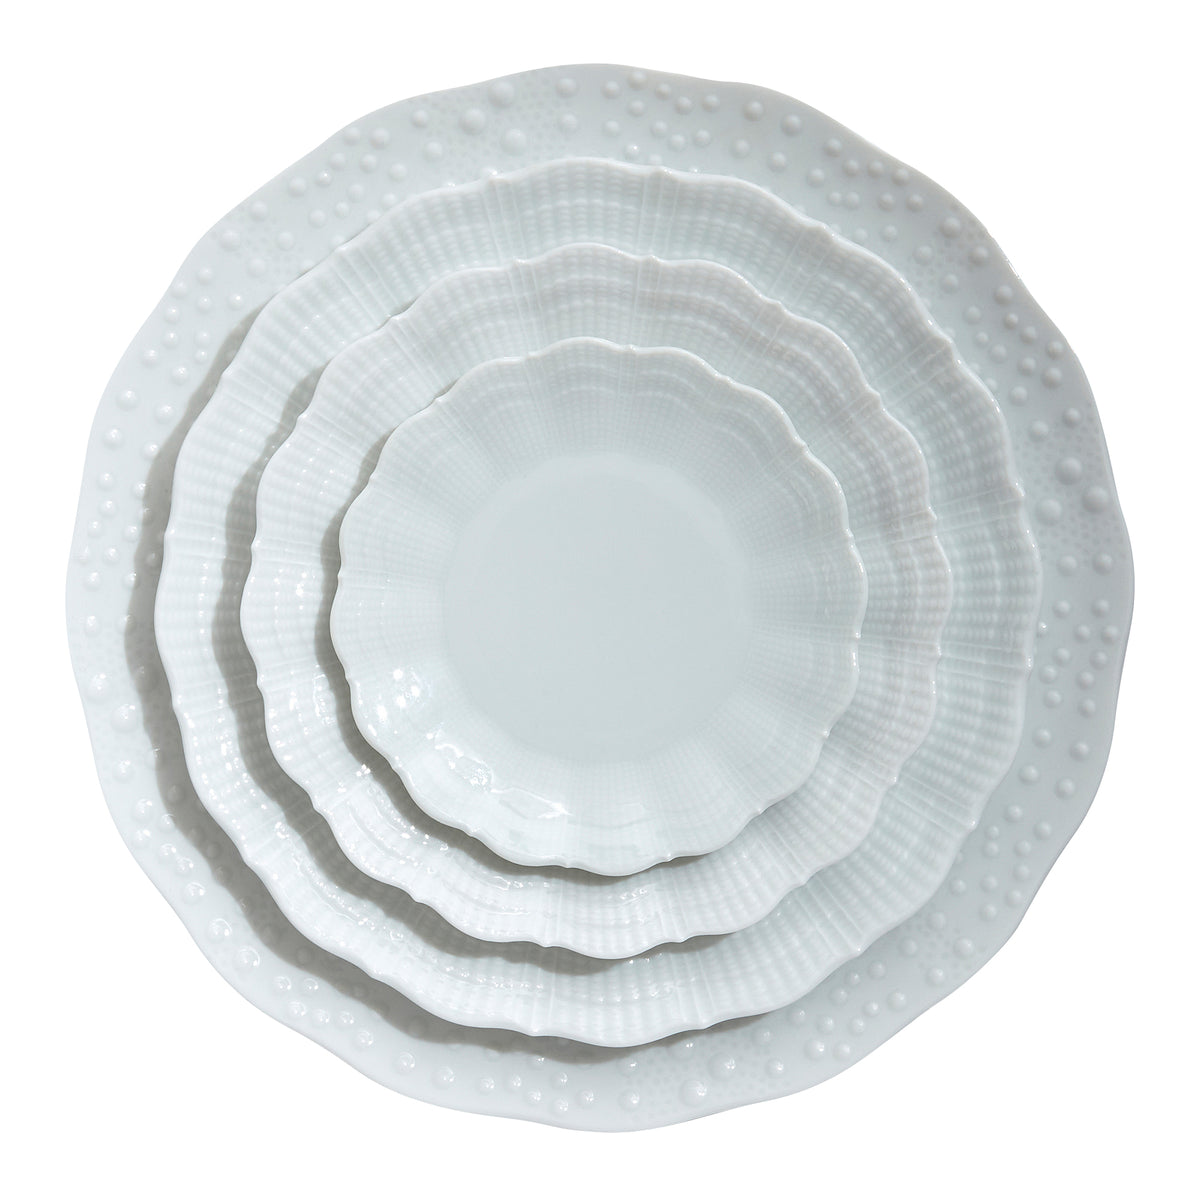 Corail Porcelain Charger Plate